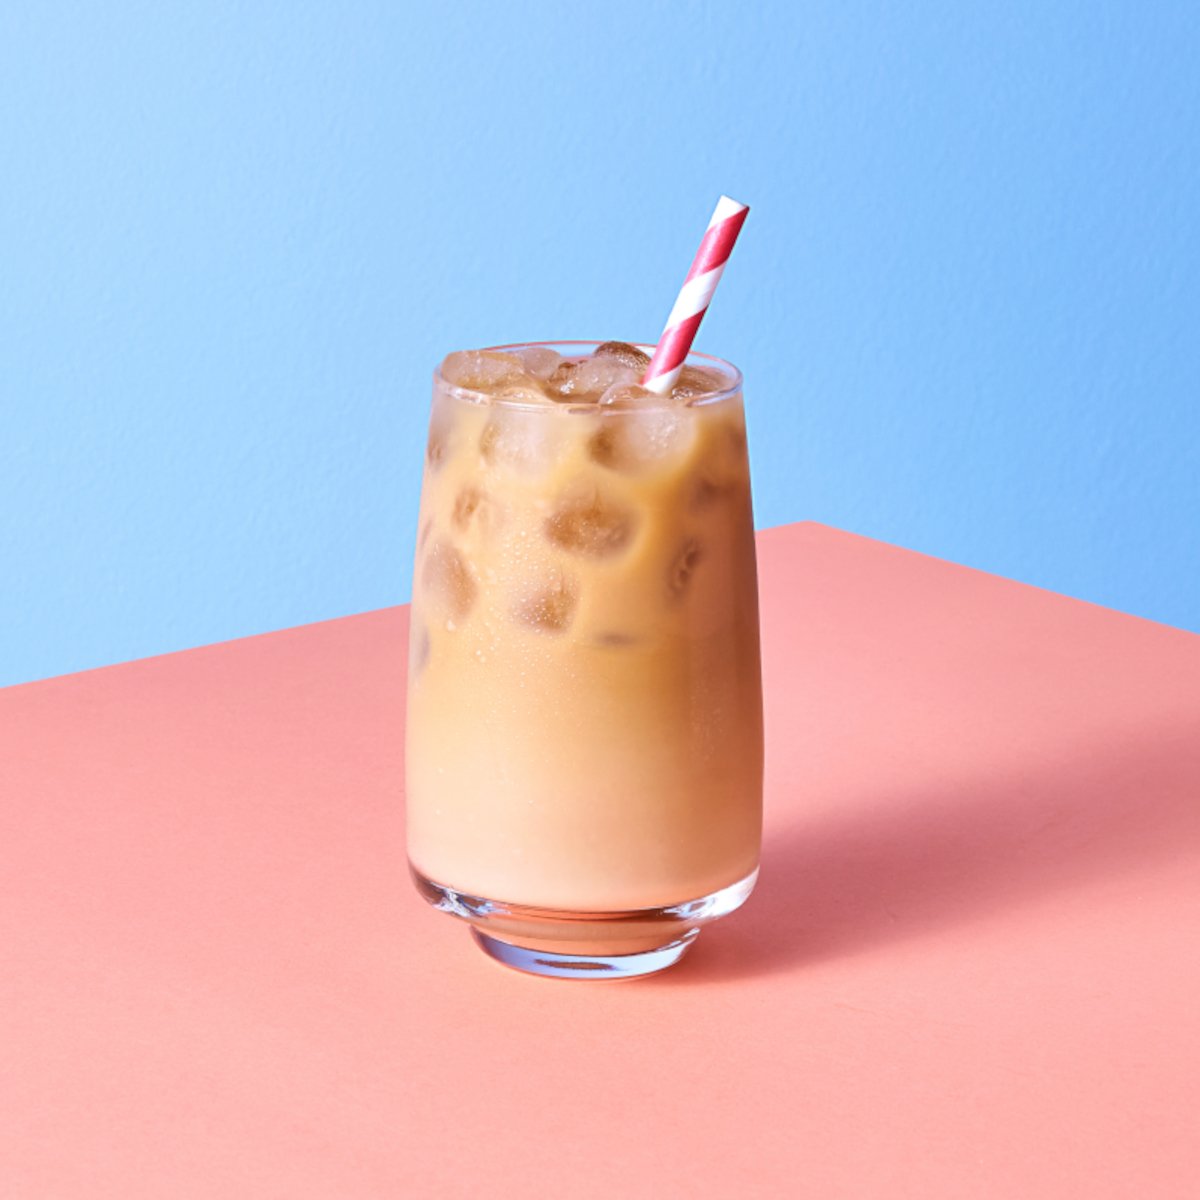 a-glass-of-iced-coffee-with-a-cute-straw-on-a-pink-and-blue-background